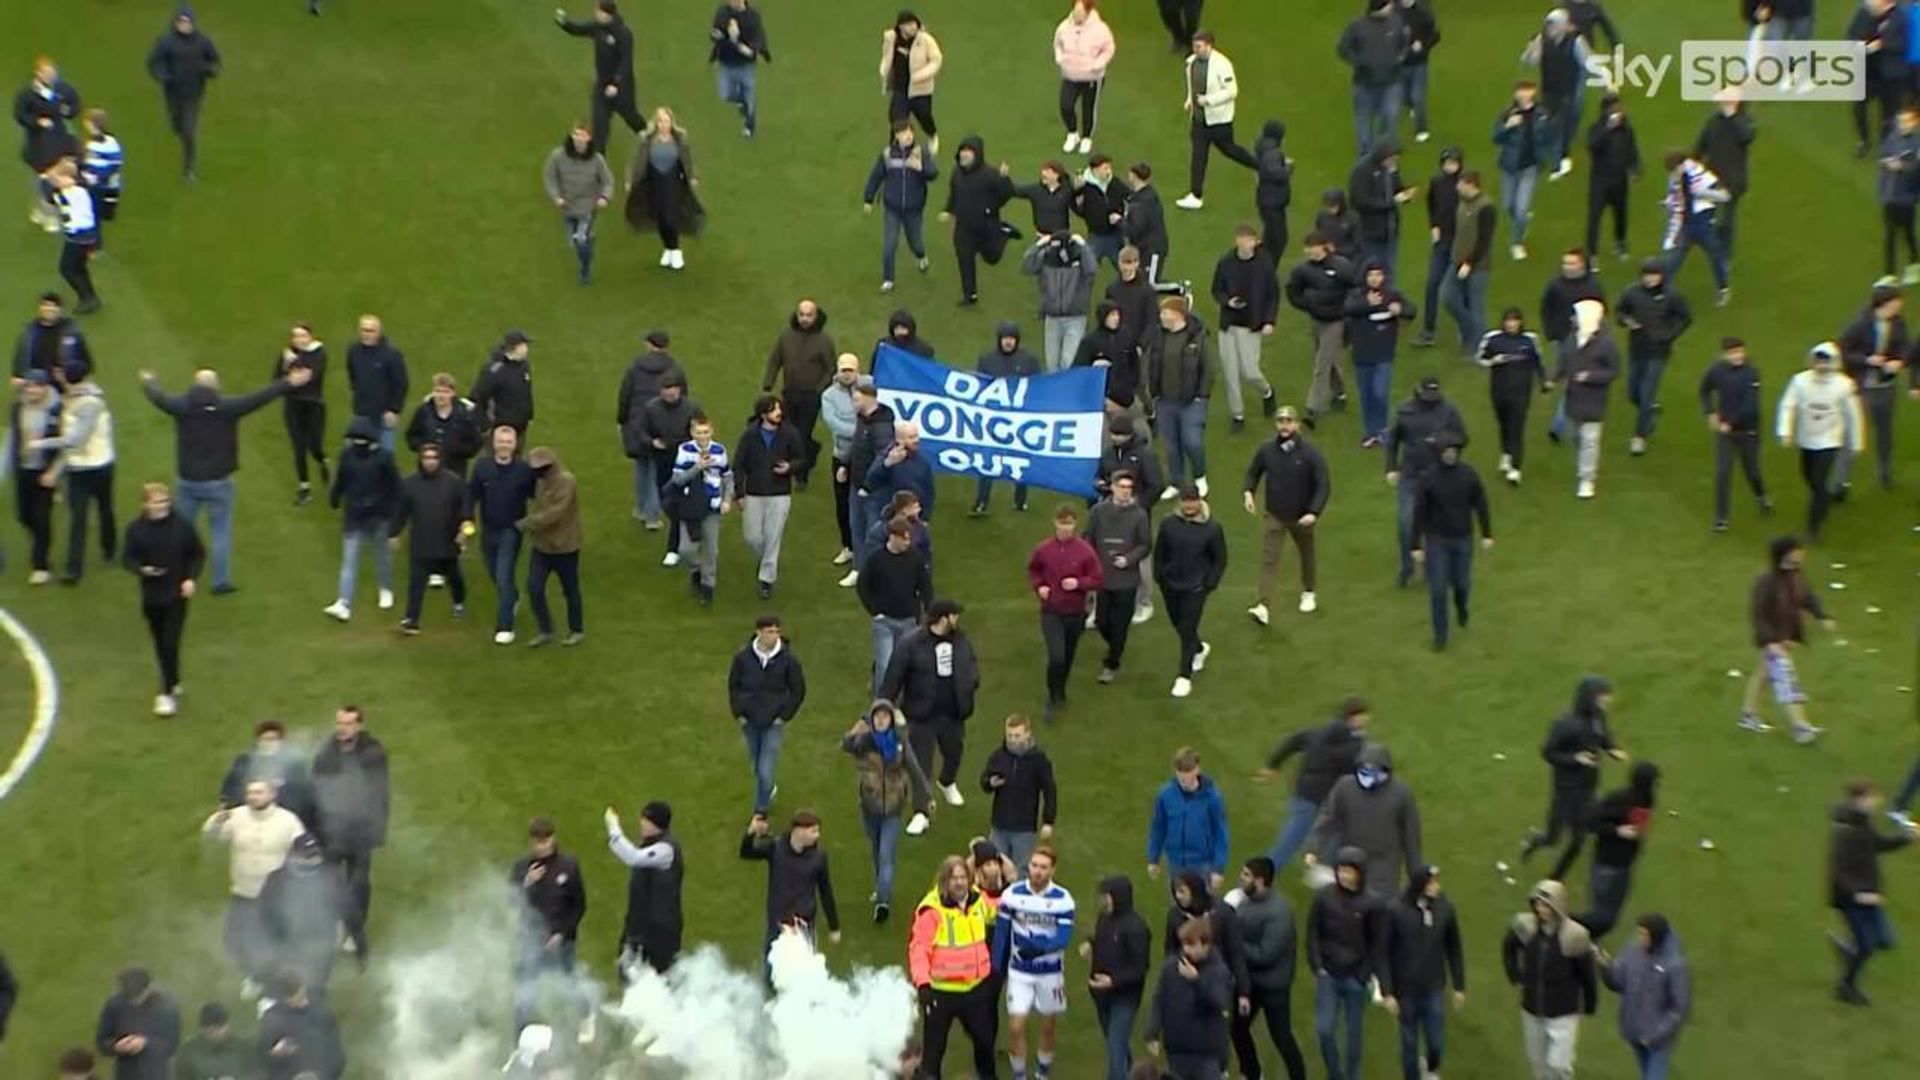 Reading game abandoned after fans invade pitch to protest against owner